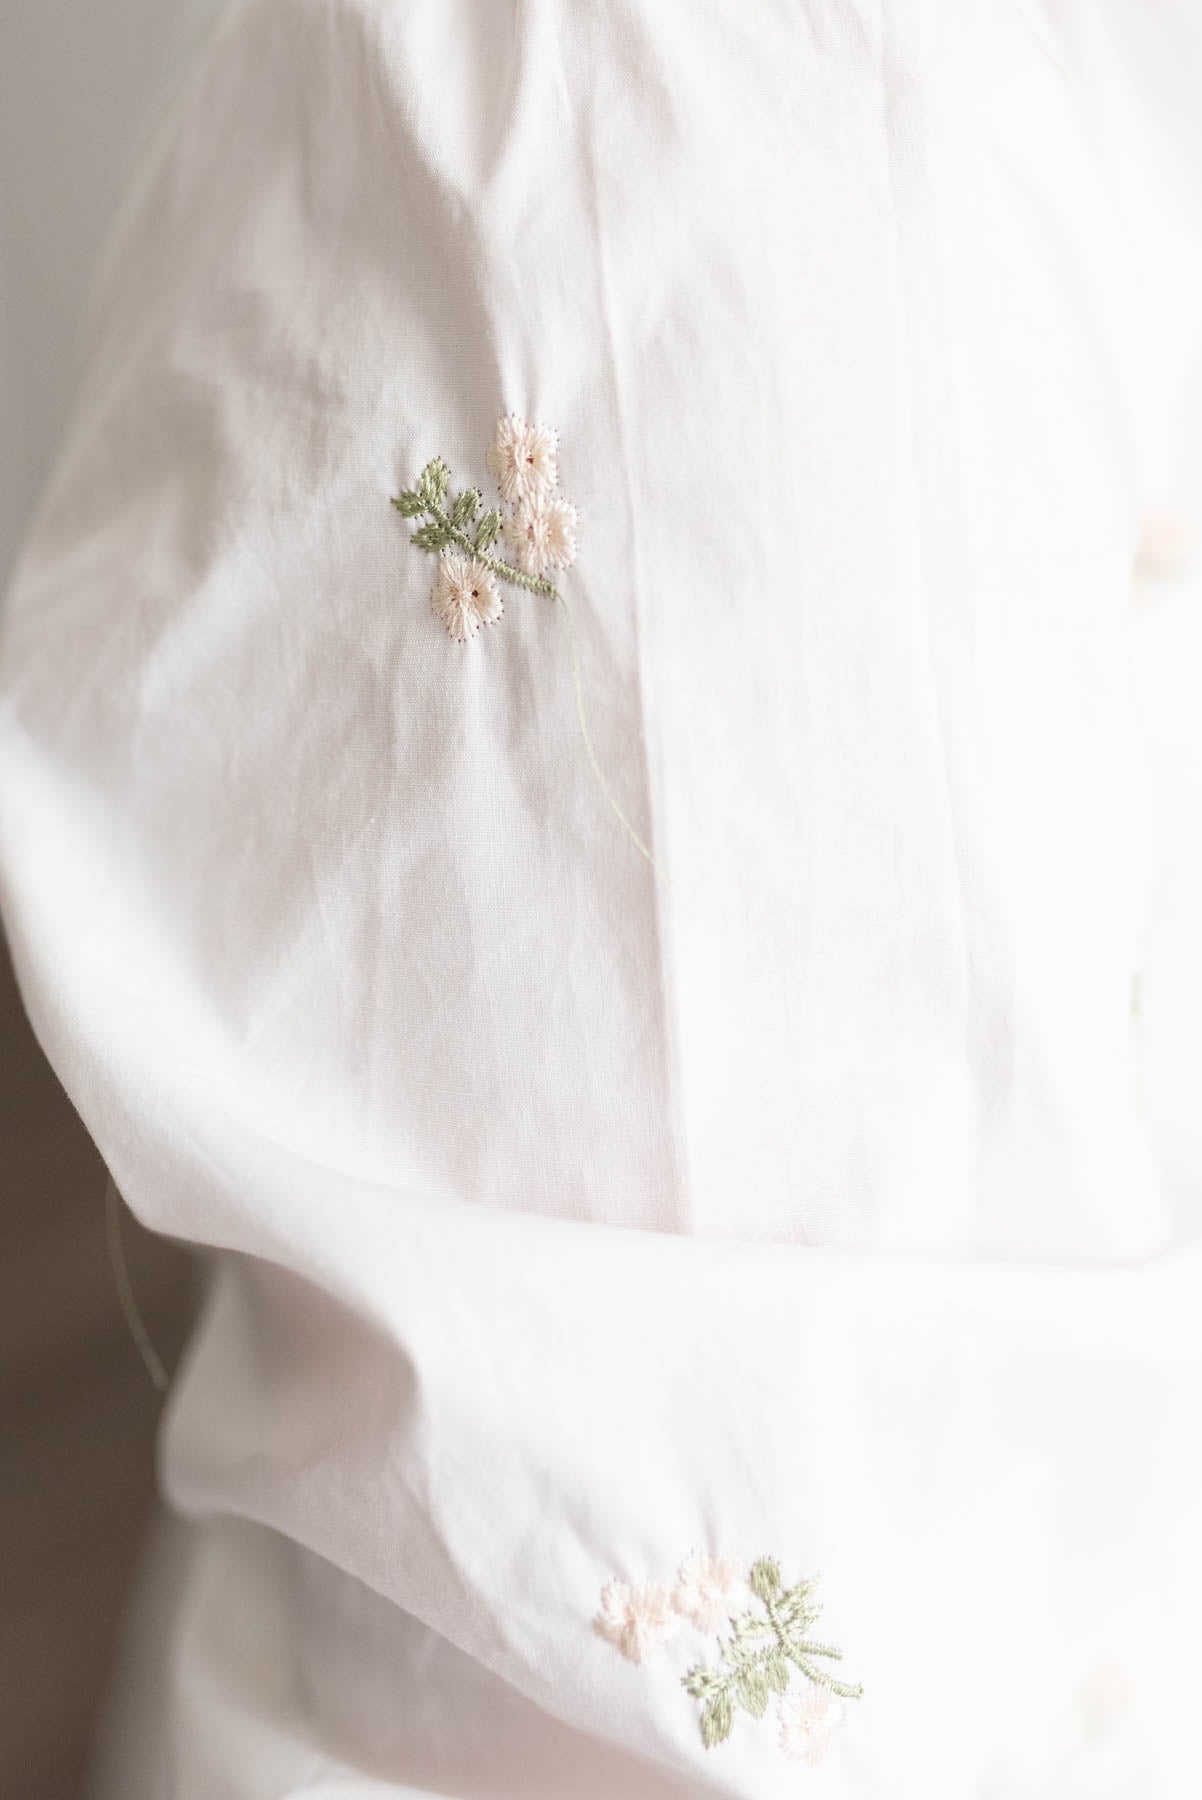 The embroidery on the ivory embroidered button down dress